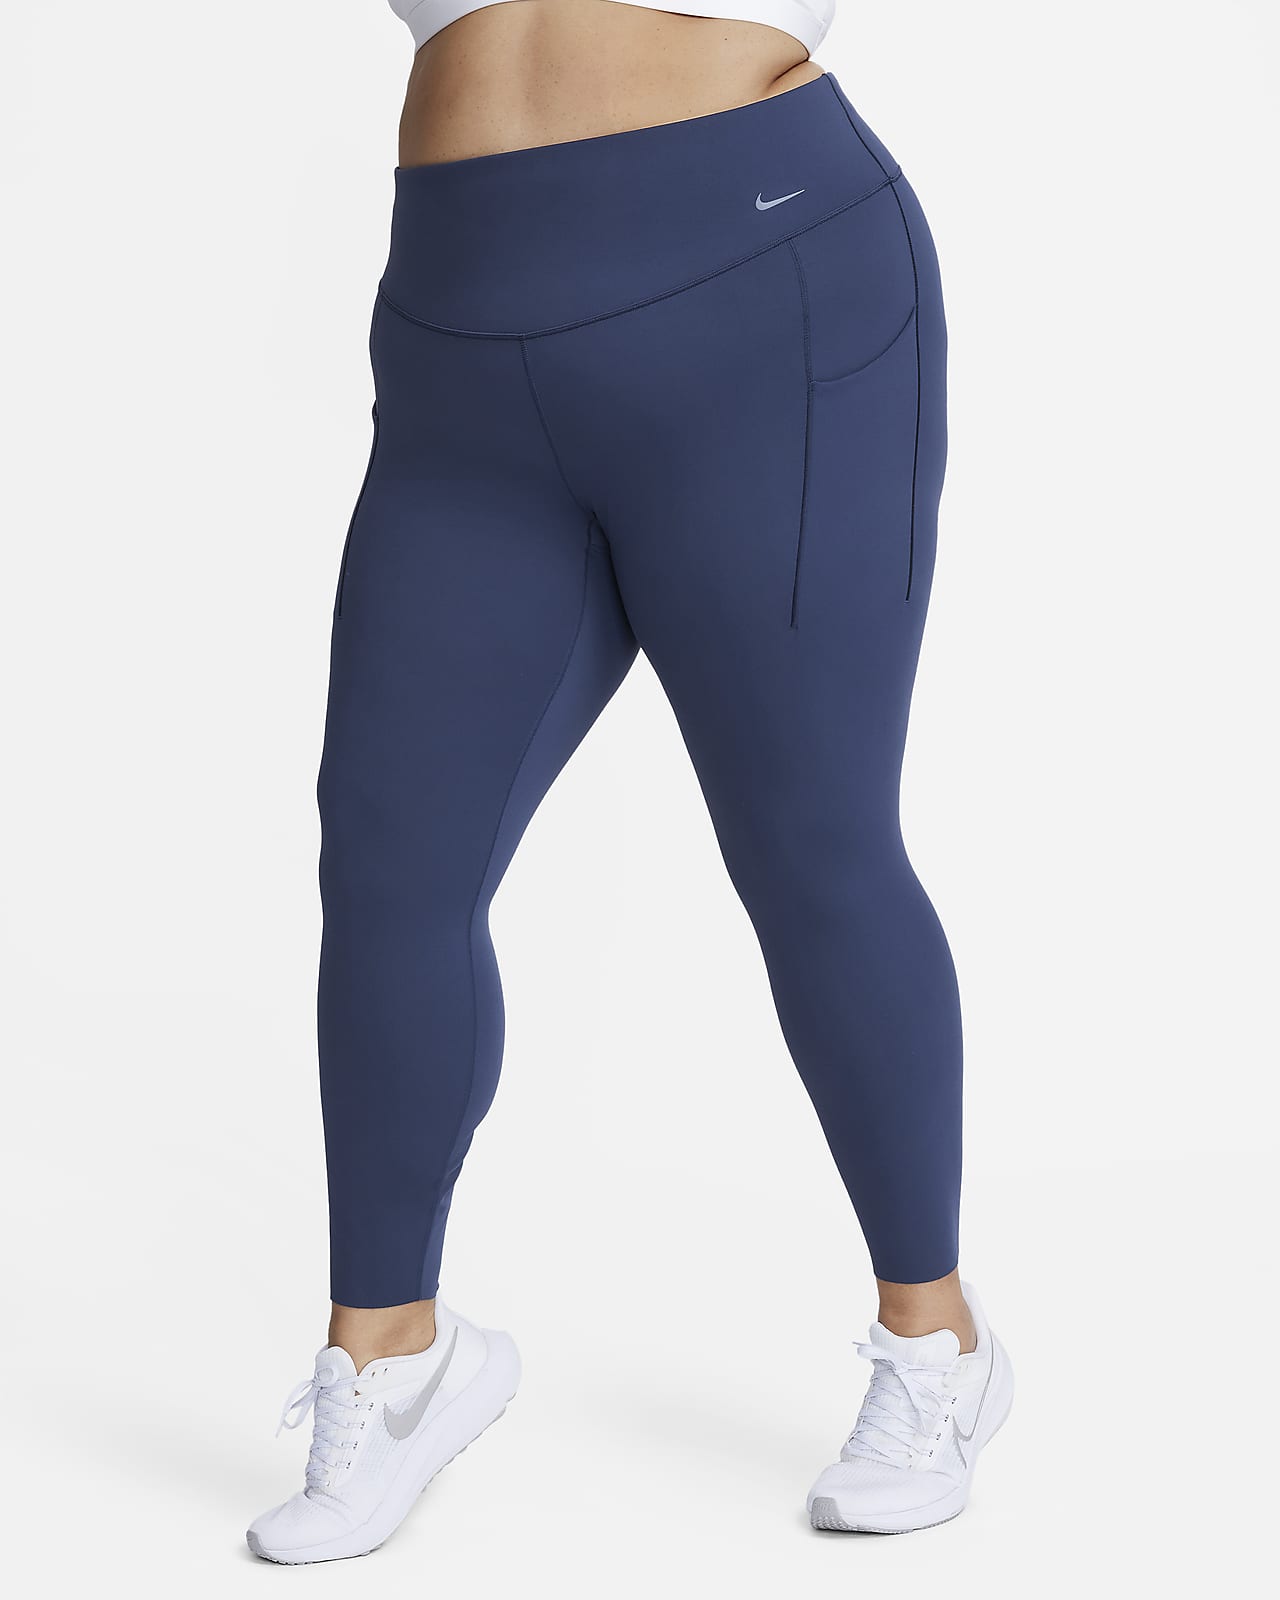 Women's Sports / Yoga Leggings Plus Size With Pockets - Jogging Workout  Running Stretch Gym Tights.